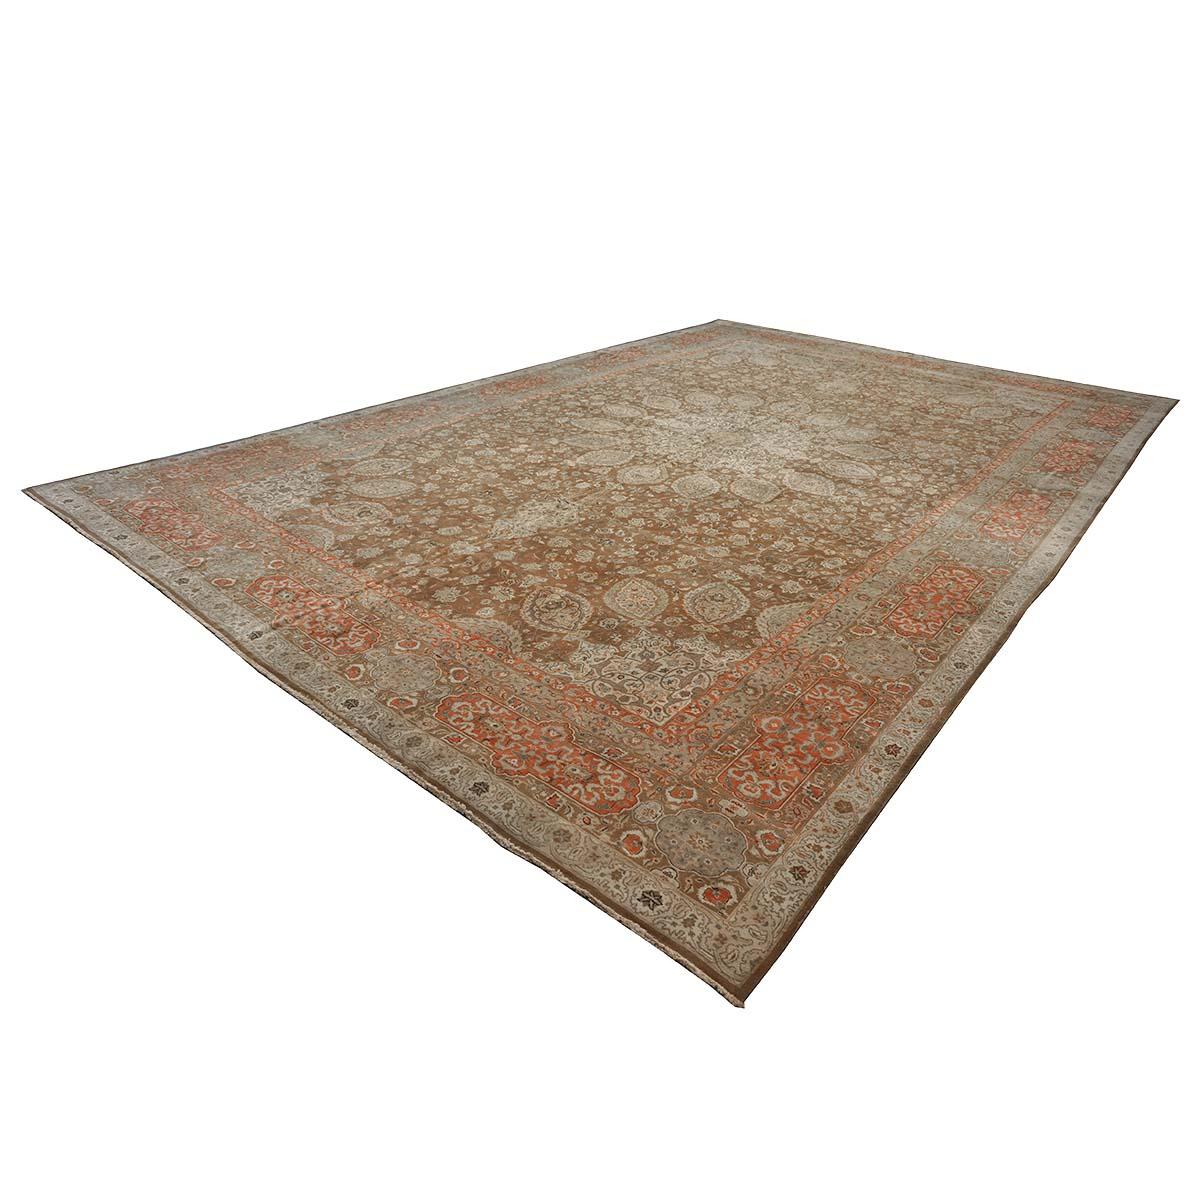 Antique 1930s Persian Tabriz 13x20 Brown & Salmon Oversized Handmade Area Rug For Sale 1